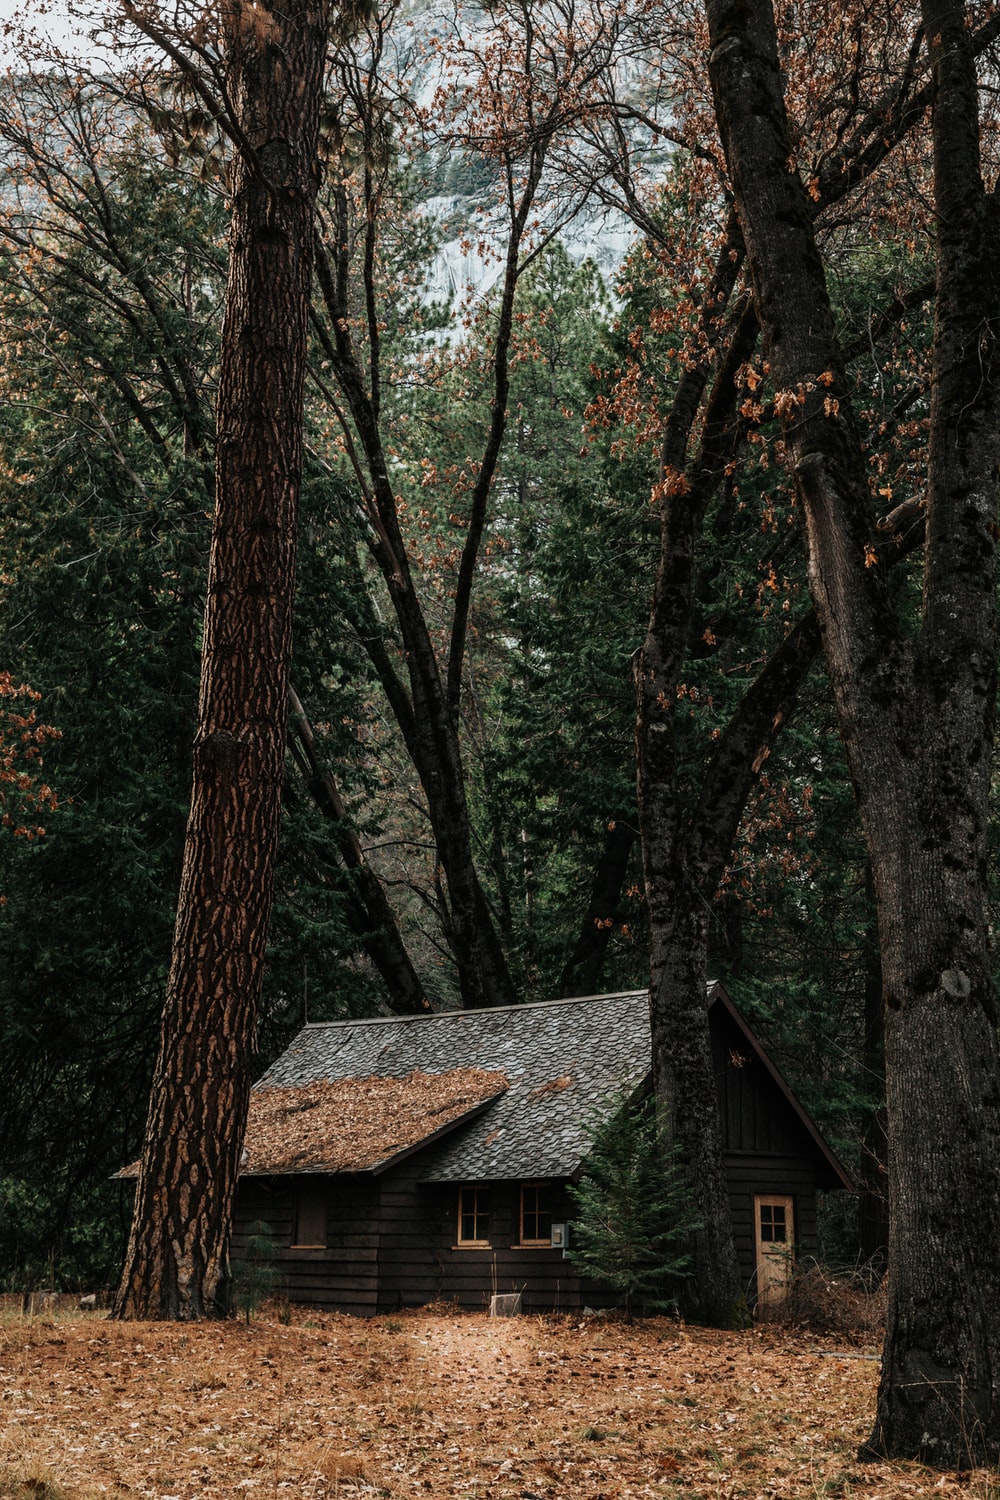 Forest House Picture. Download Free Image